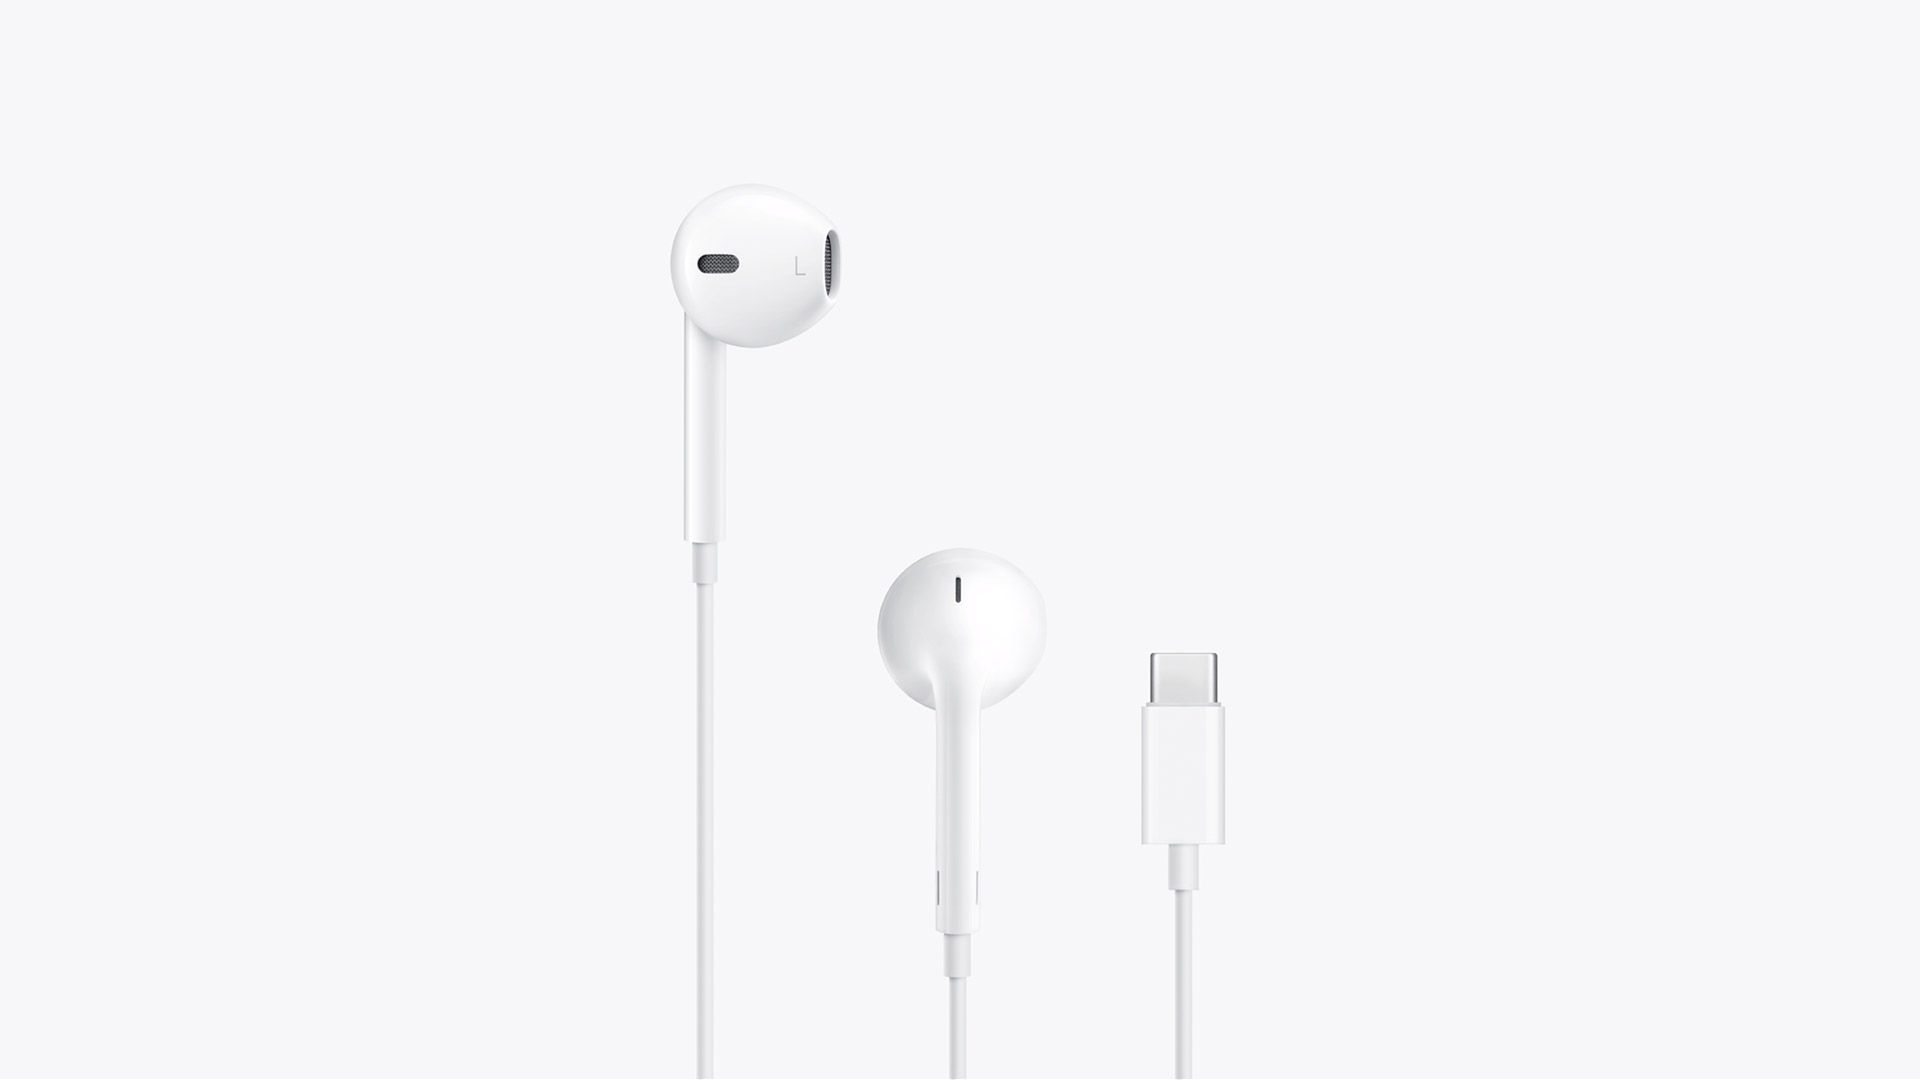 Apple now sells USB-C EarPods, but there are caveats